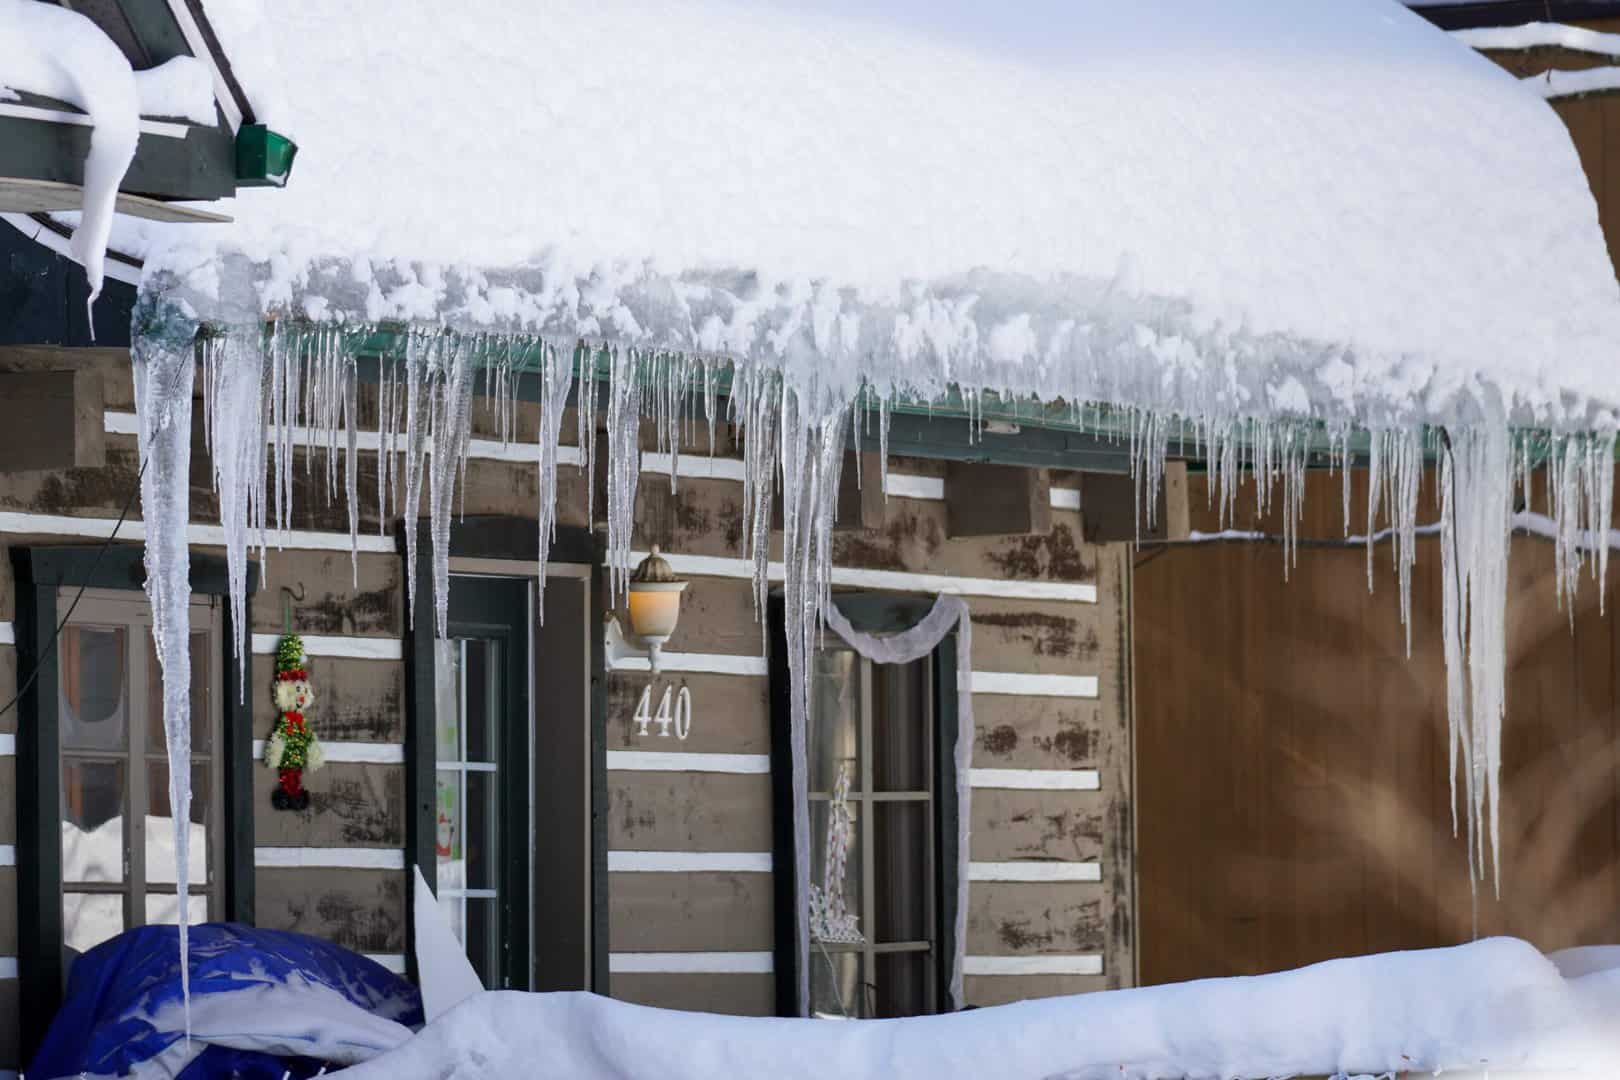 Minneapolis roof covered in snow and icicles.